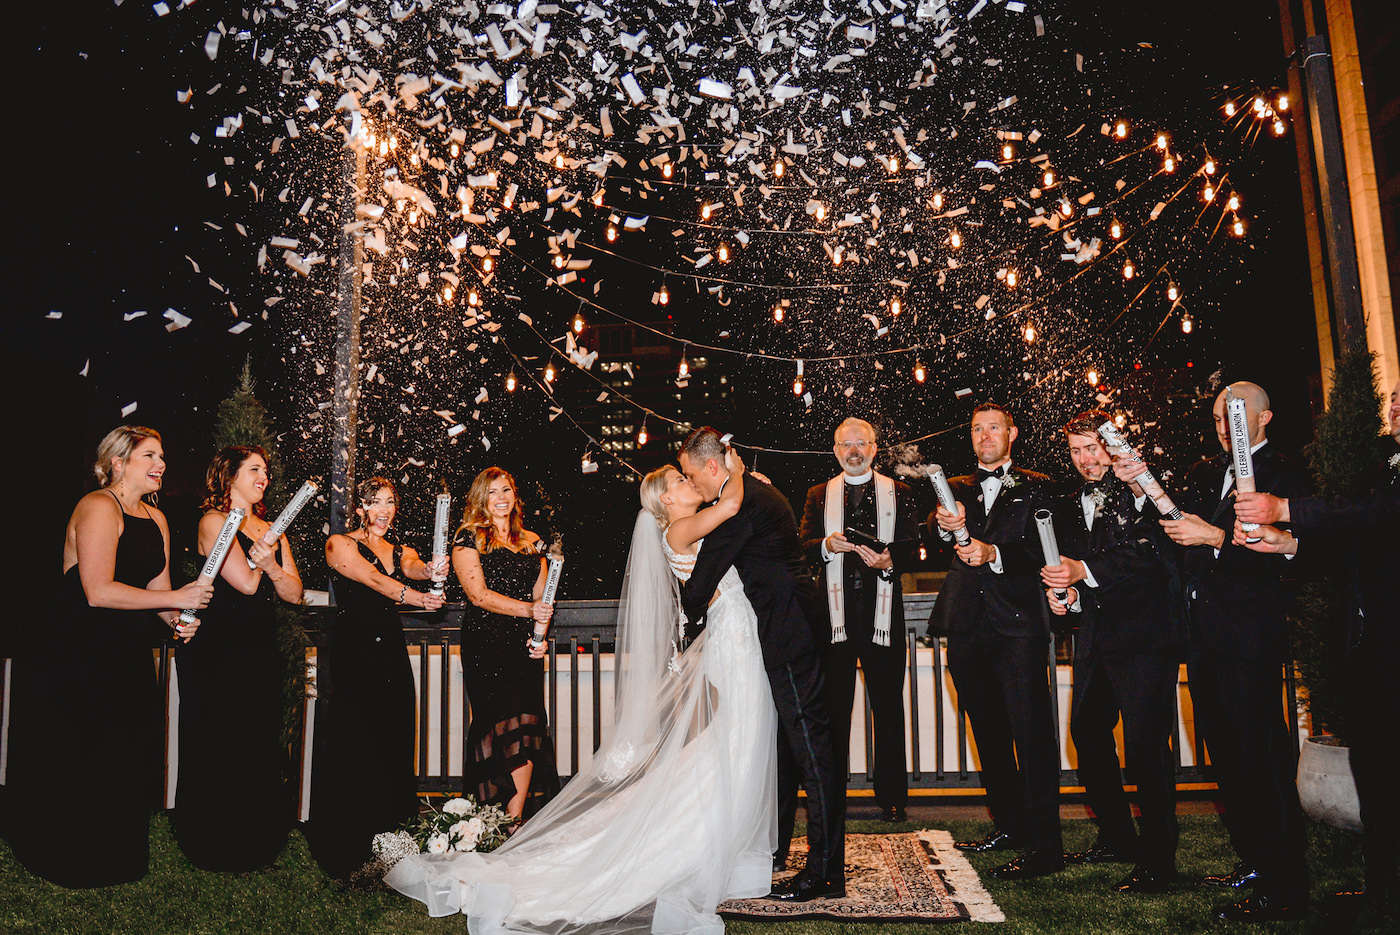 Bride and Groom First Kiss Confetti Canons | Black and White Wedding Ceremony with Edison Bulb Backdrop | Downtown St. Pete Wedding Venue Station House